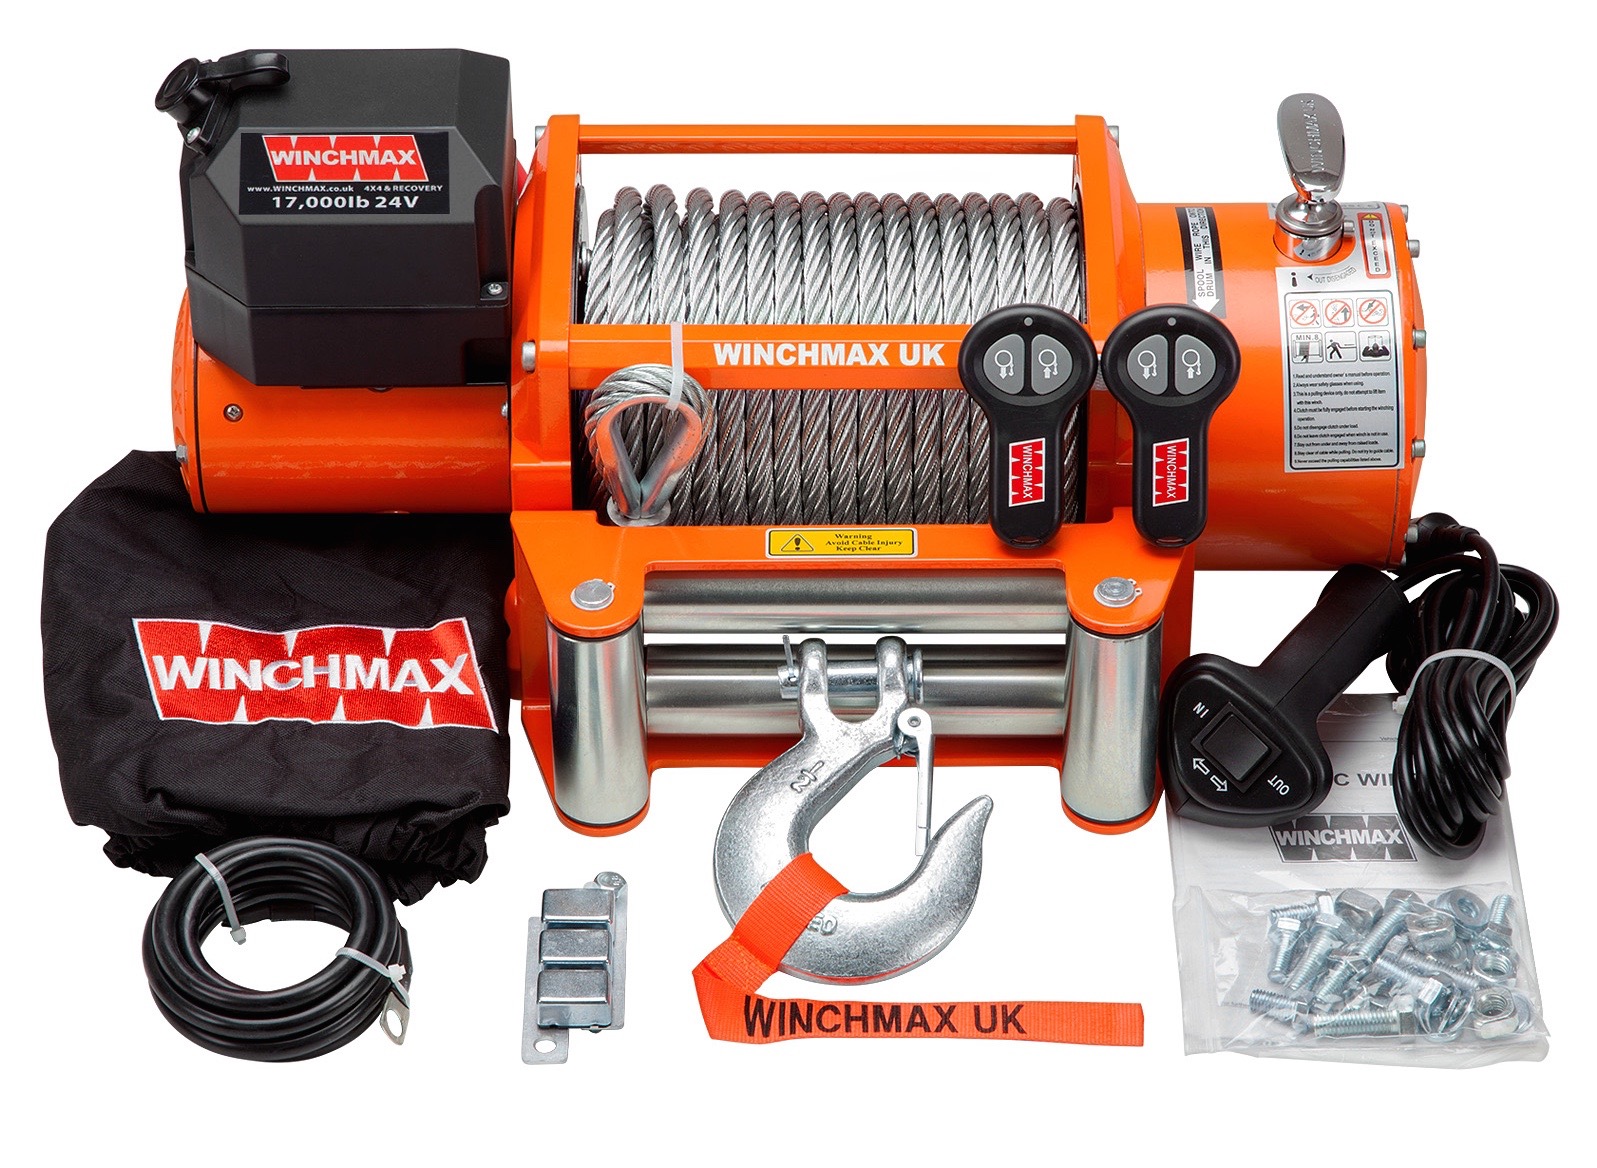 product_view.php?pid=WINCHMAX 17000LB 24V ELECTRIC STEEL CABLE WINCH WITH WIRELESS REMOTES